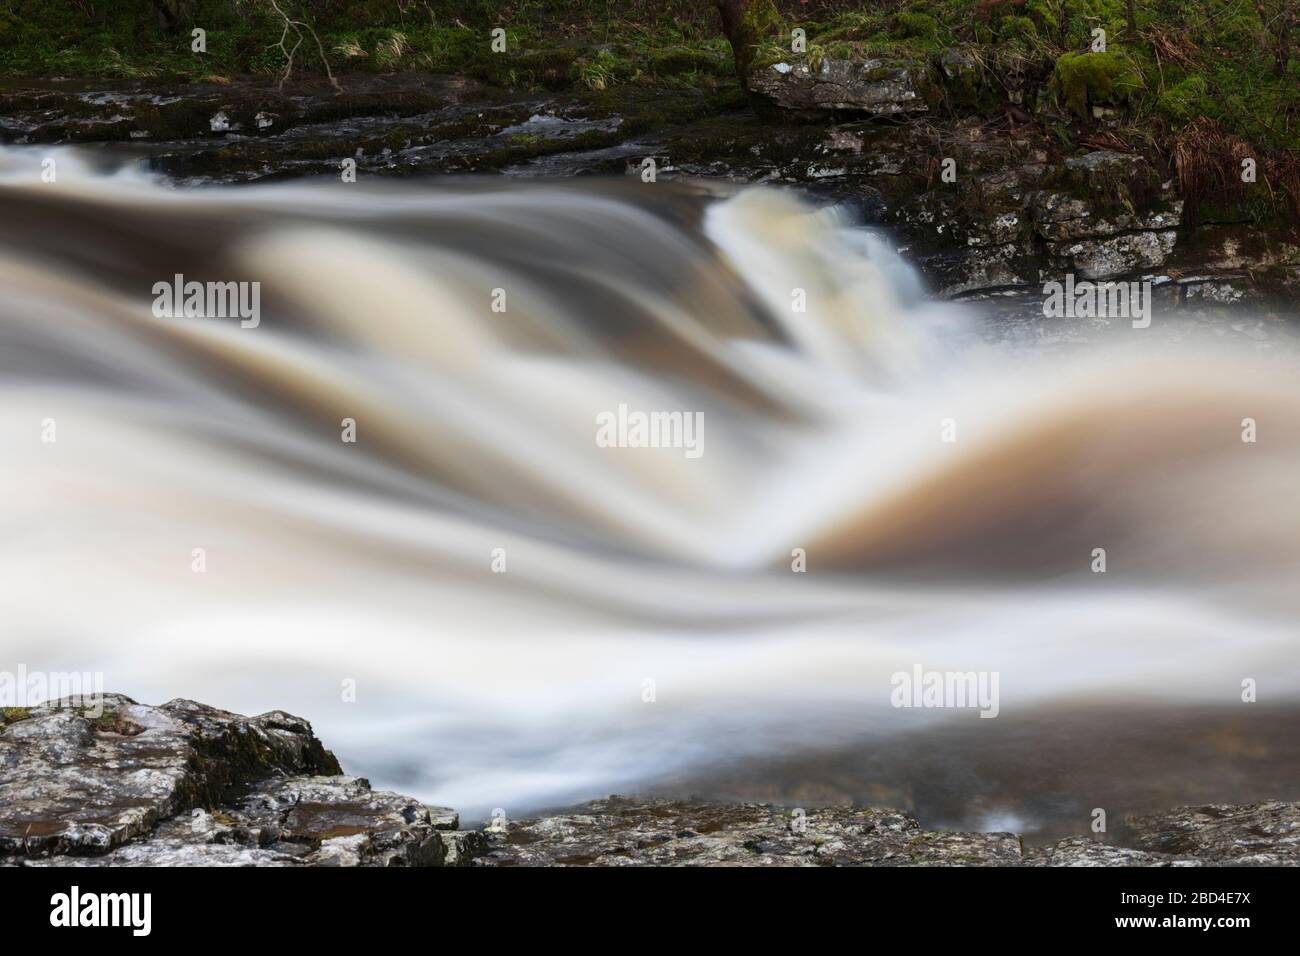 Cascata Stainforth Force nel Parco Nazionale Yorkshire Dales. Foto Stock